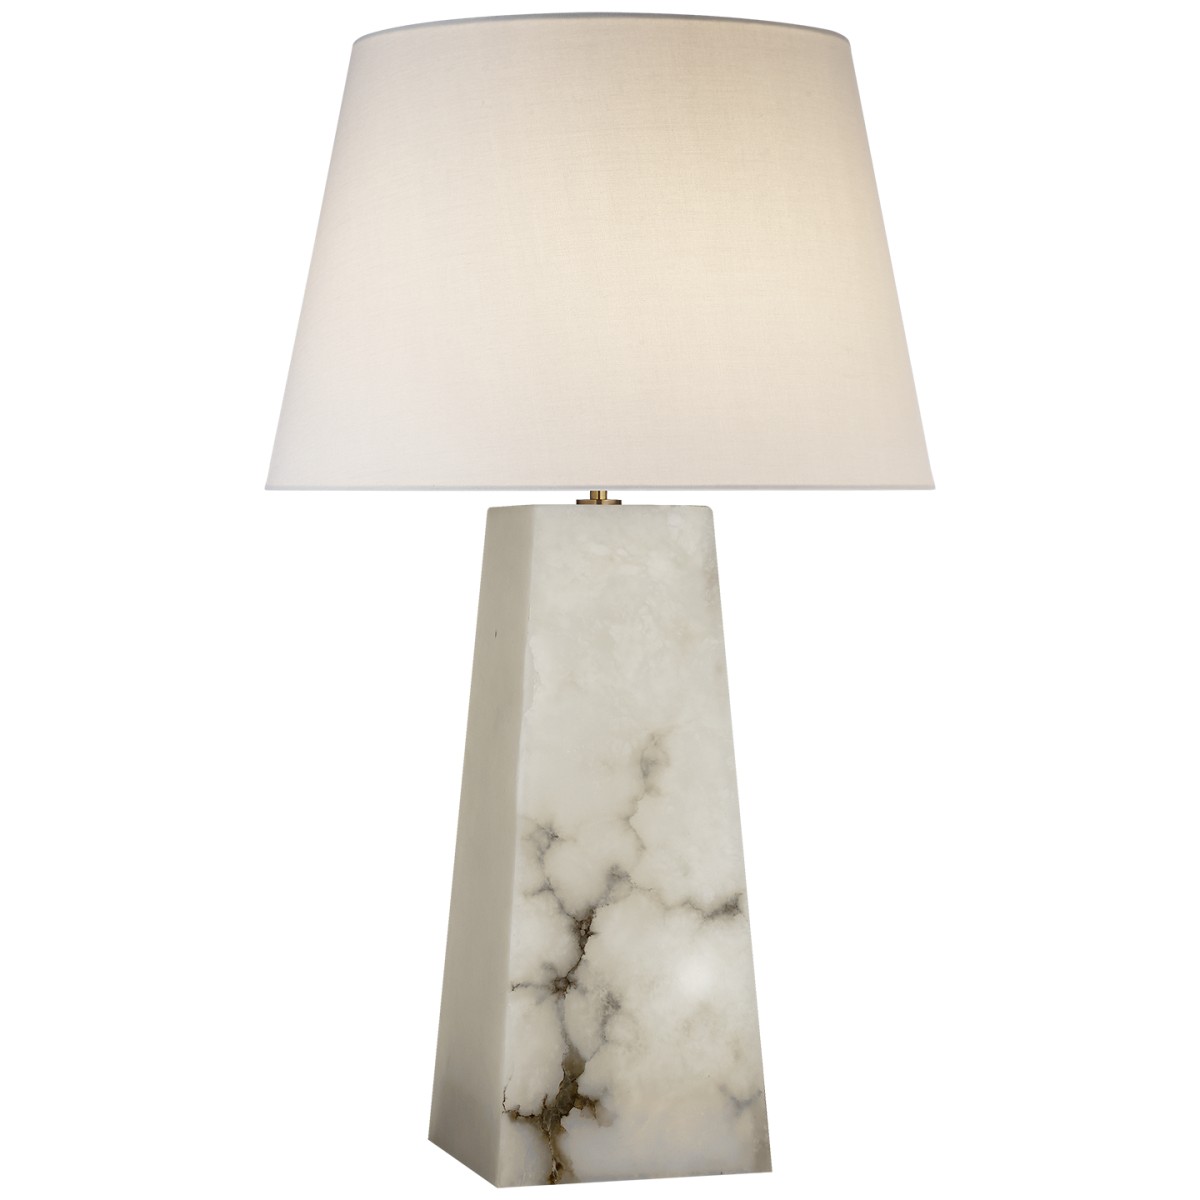 Evoke Large Table Lamp with Linen Shade